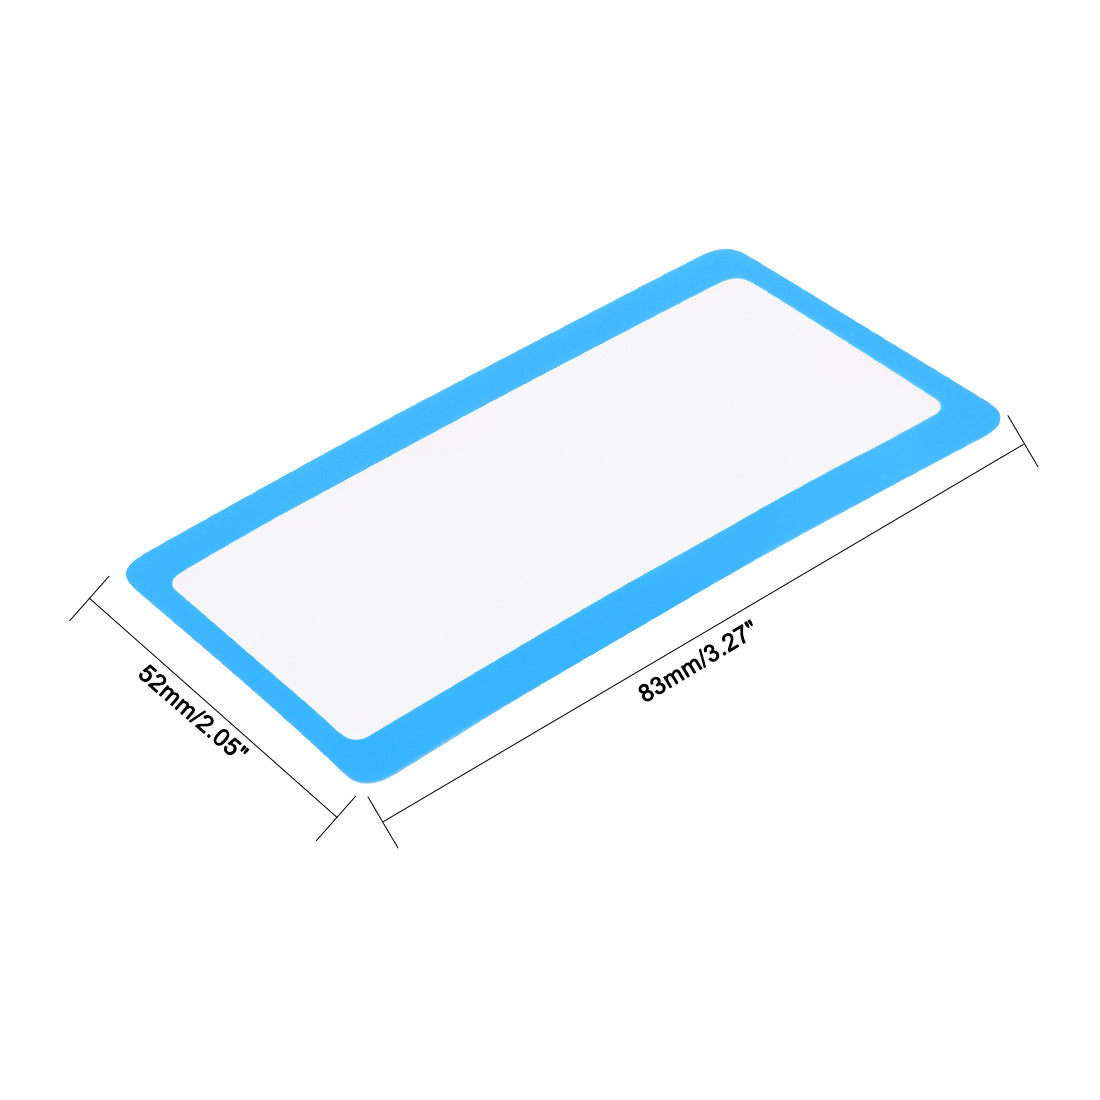 uxcell Uxcell Fresnel Lens Magnifier 75mm x 40mm 3X 300% Credit Card Magnifier for Seniors Macular Degeneration Blue 6pcs